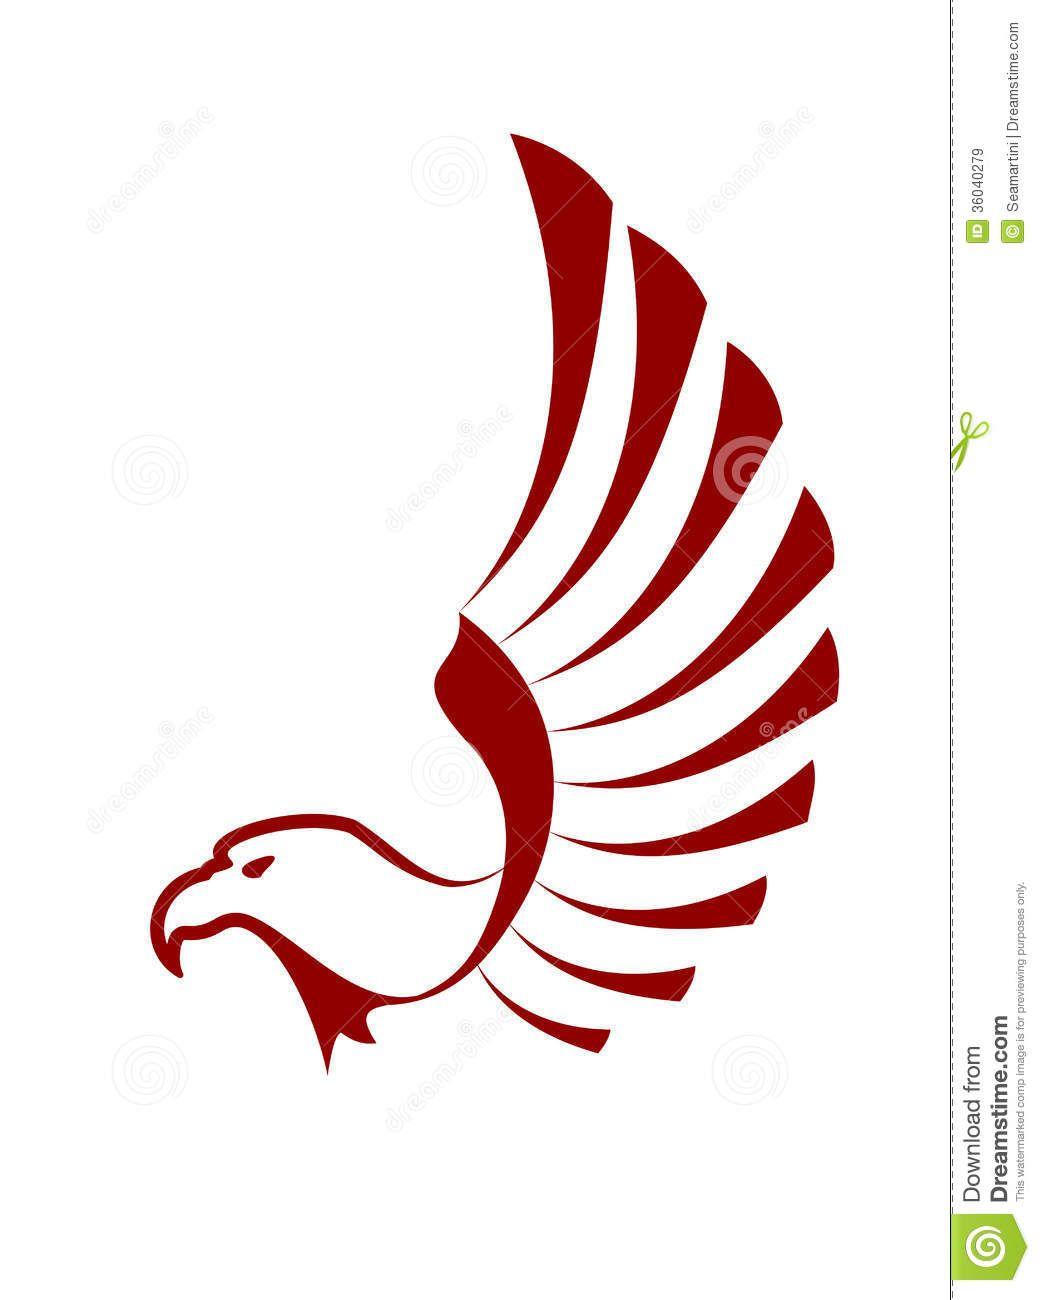 Red Eagles Logo - Red Eagle With Wings Royalty Free Stock Images - Image: 36040279 ...